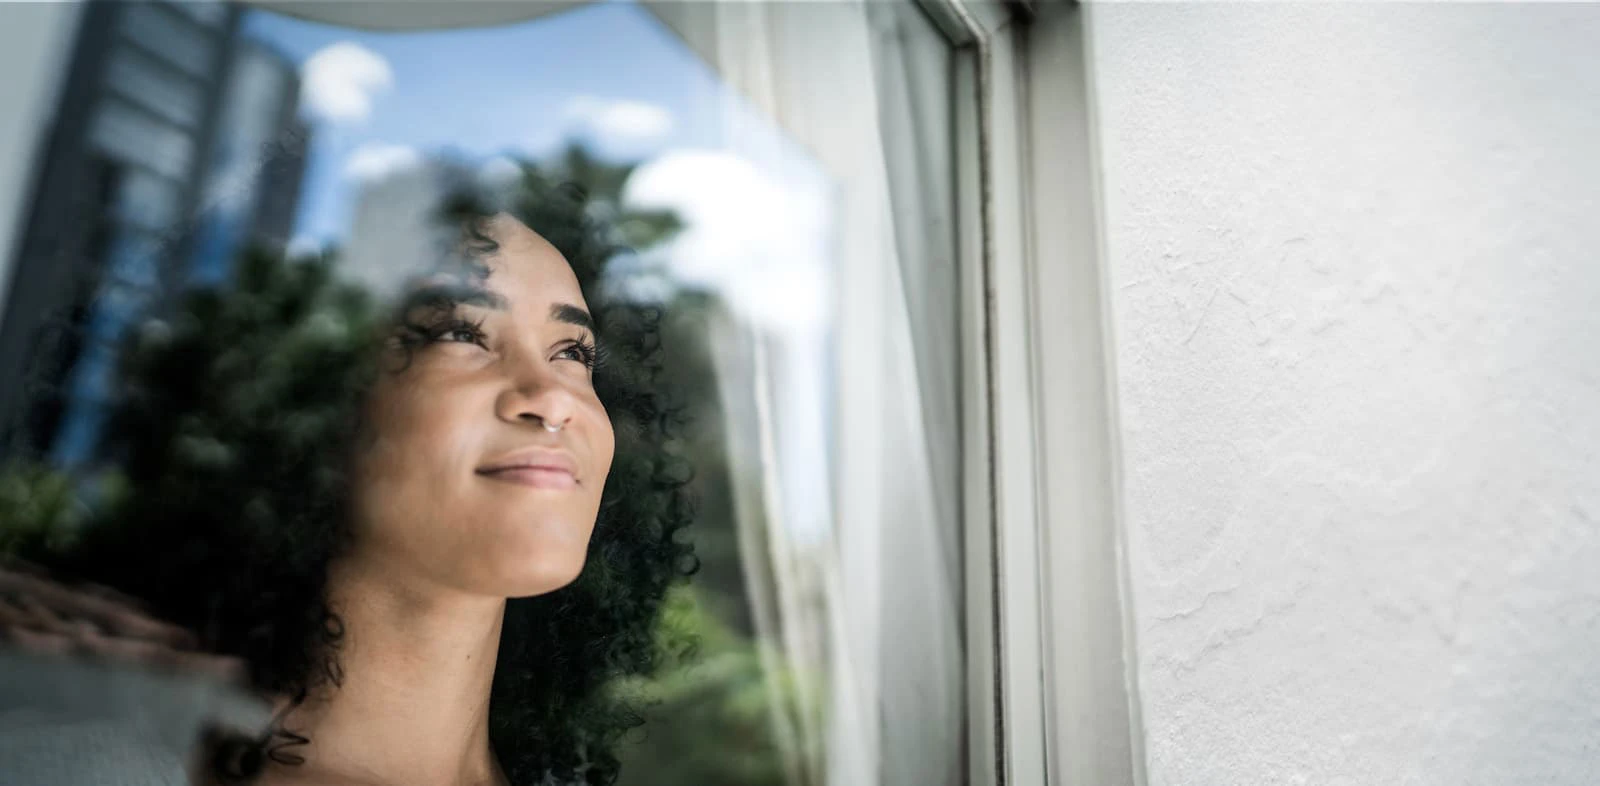 African American woman looking out a window